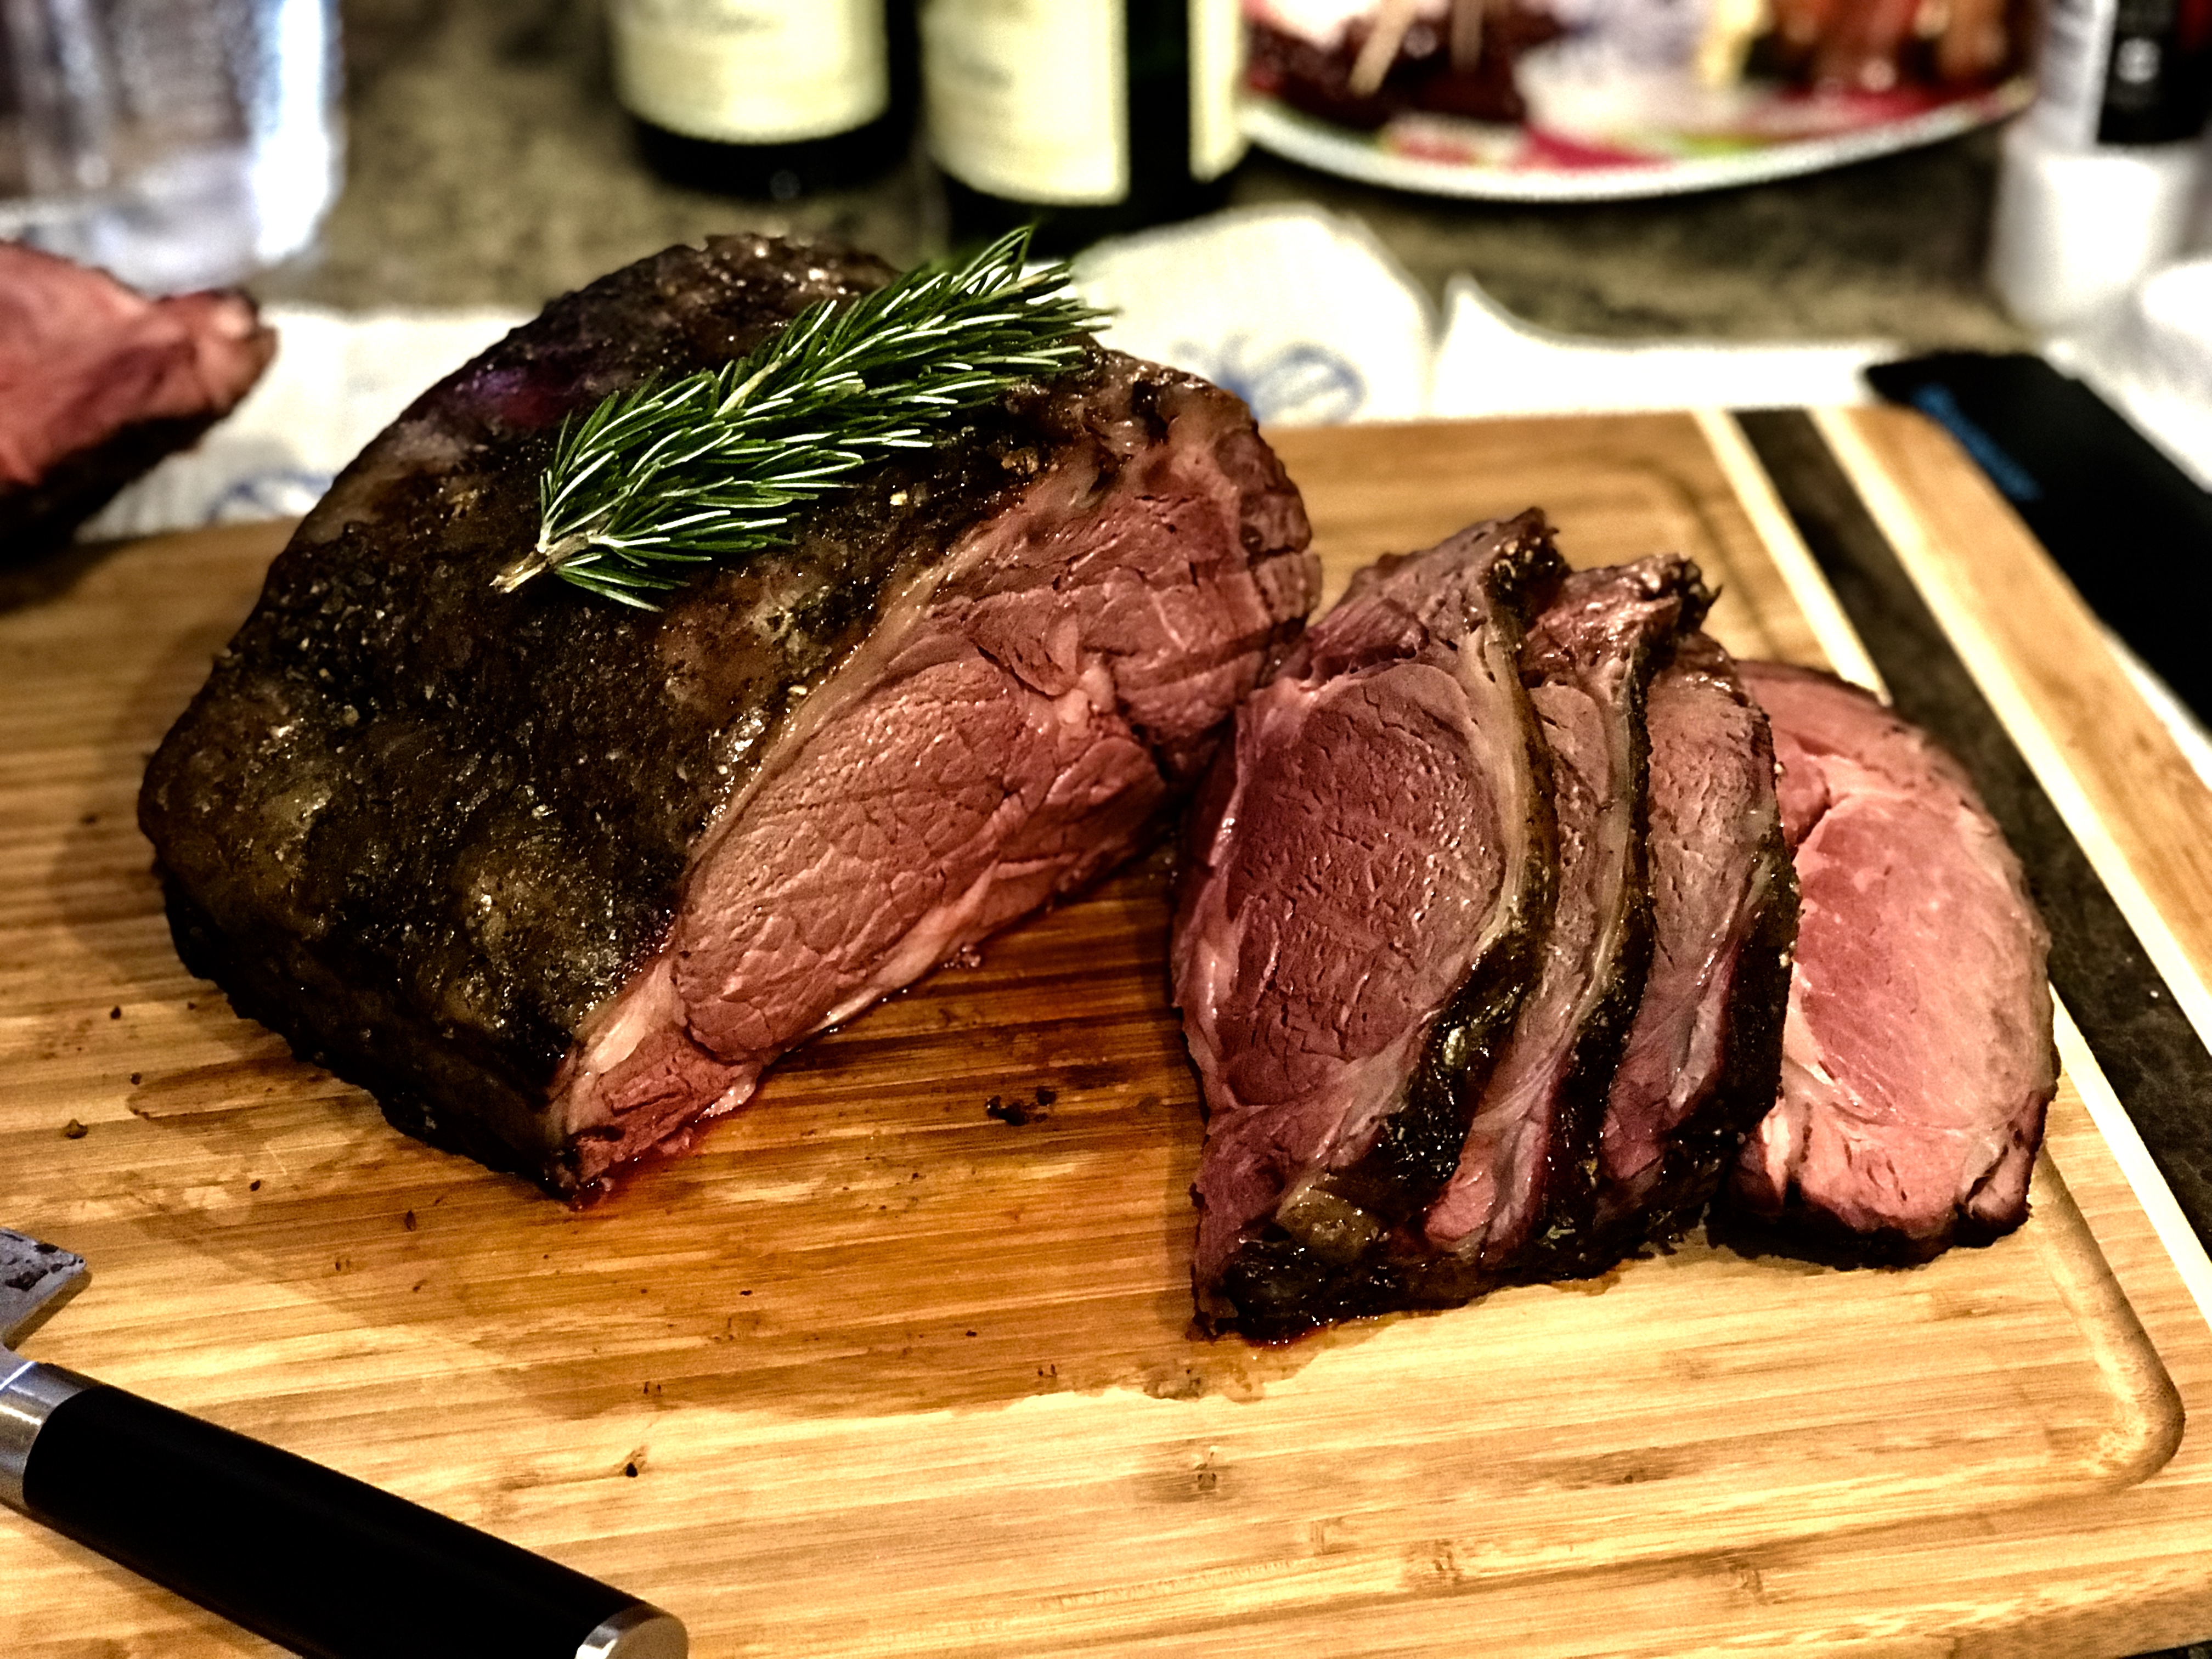 Herb Butter Smoked Prime Rib Your Go To Prime Rib Recipe Slowpoke Cooking,Mother In Laws Tongue Plant